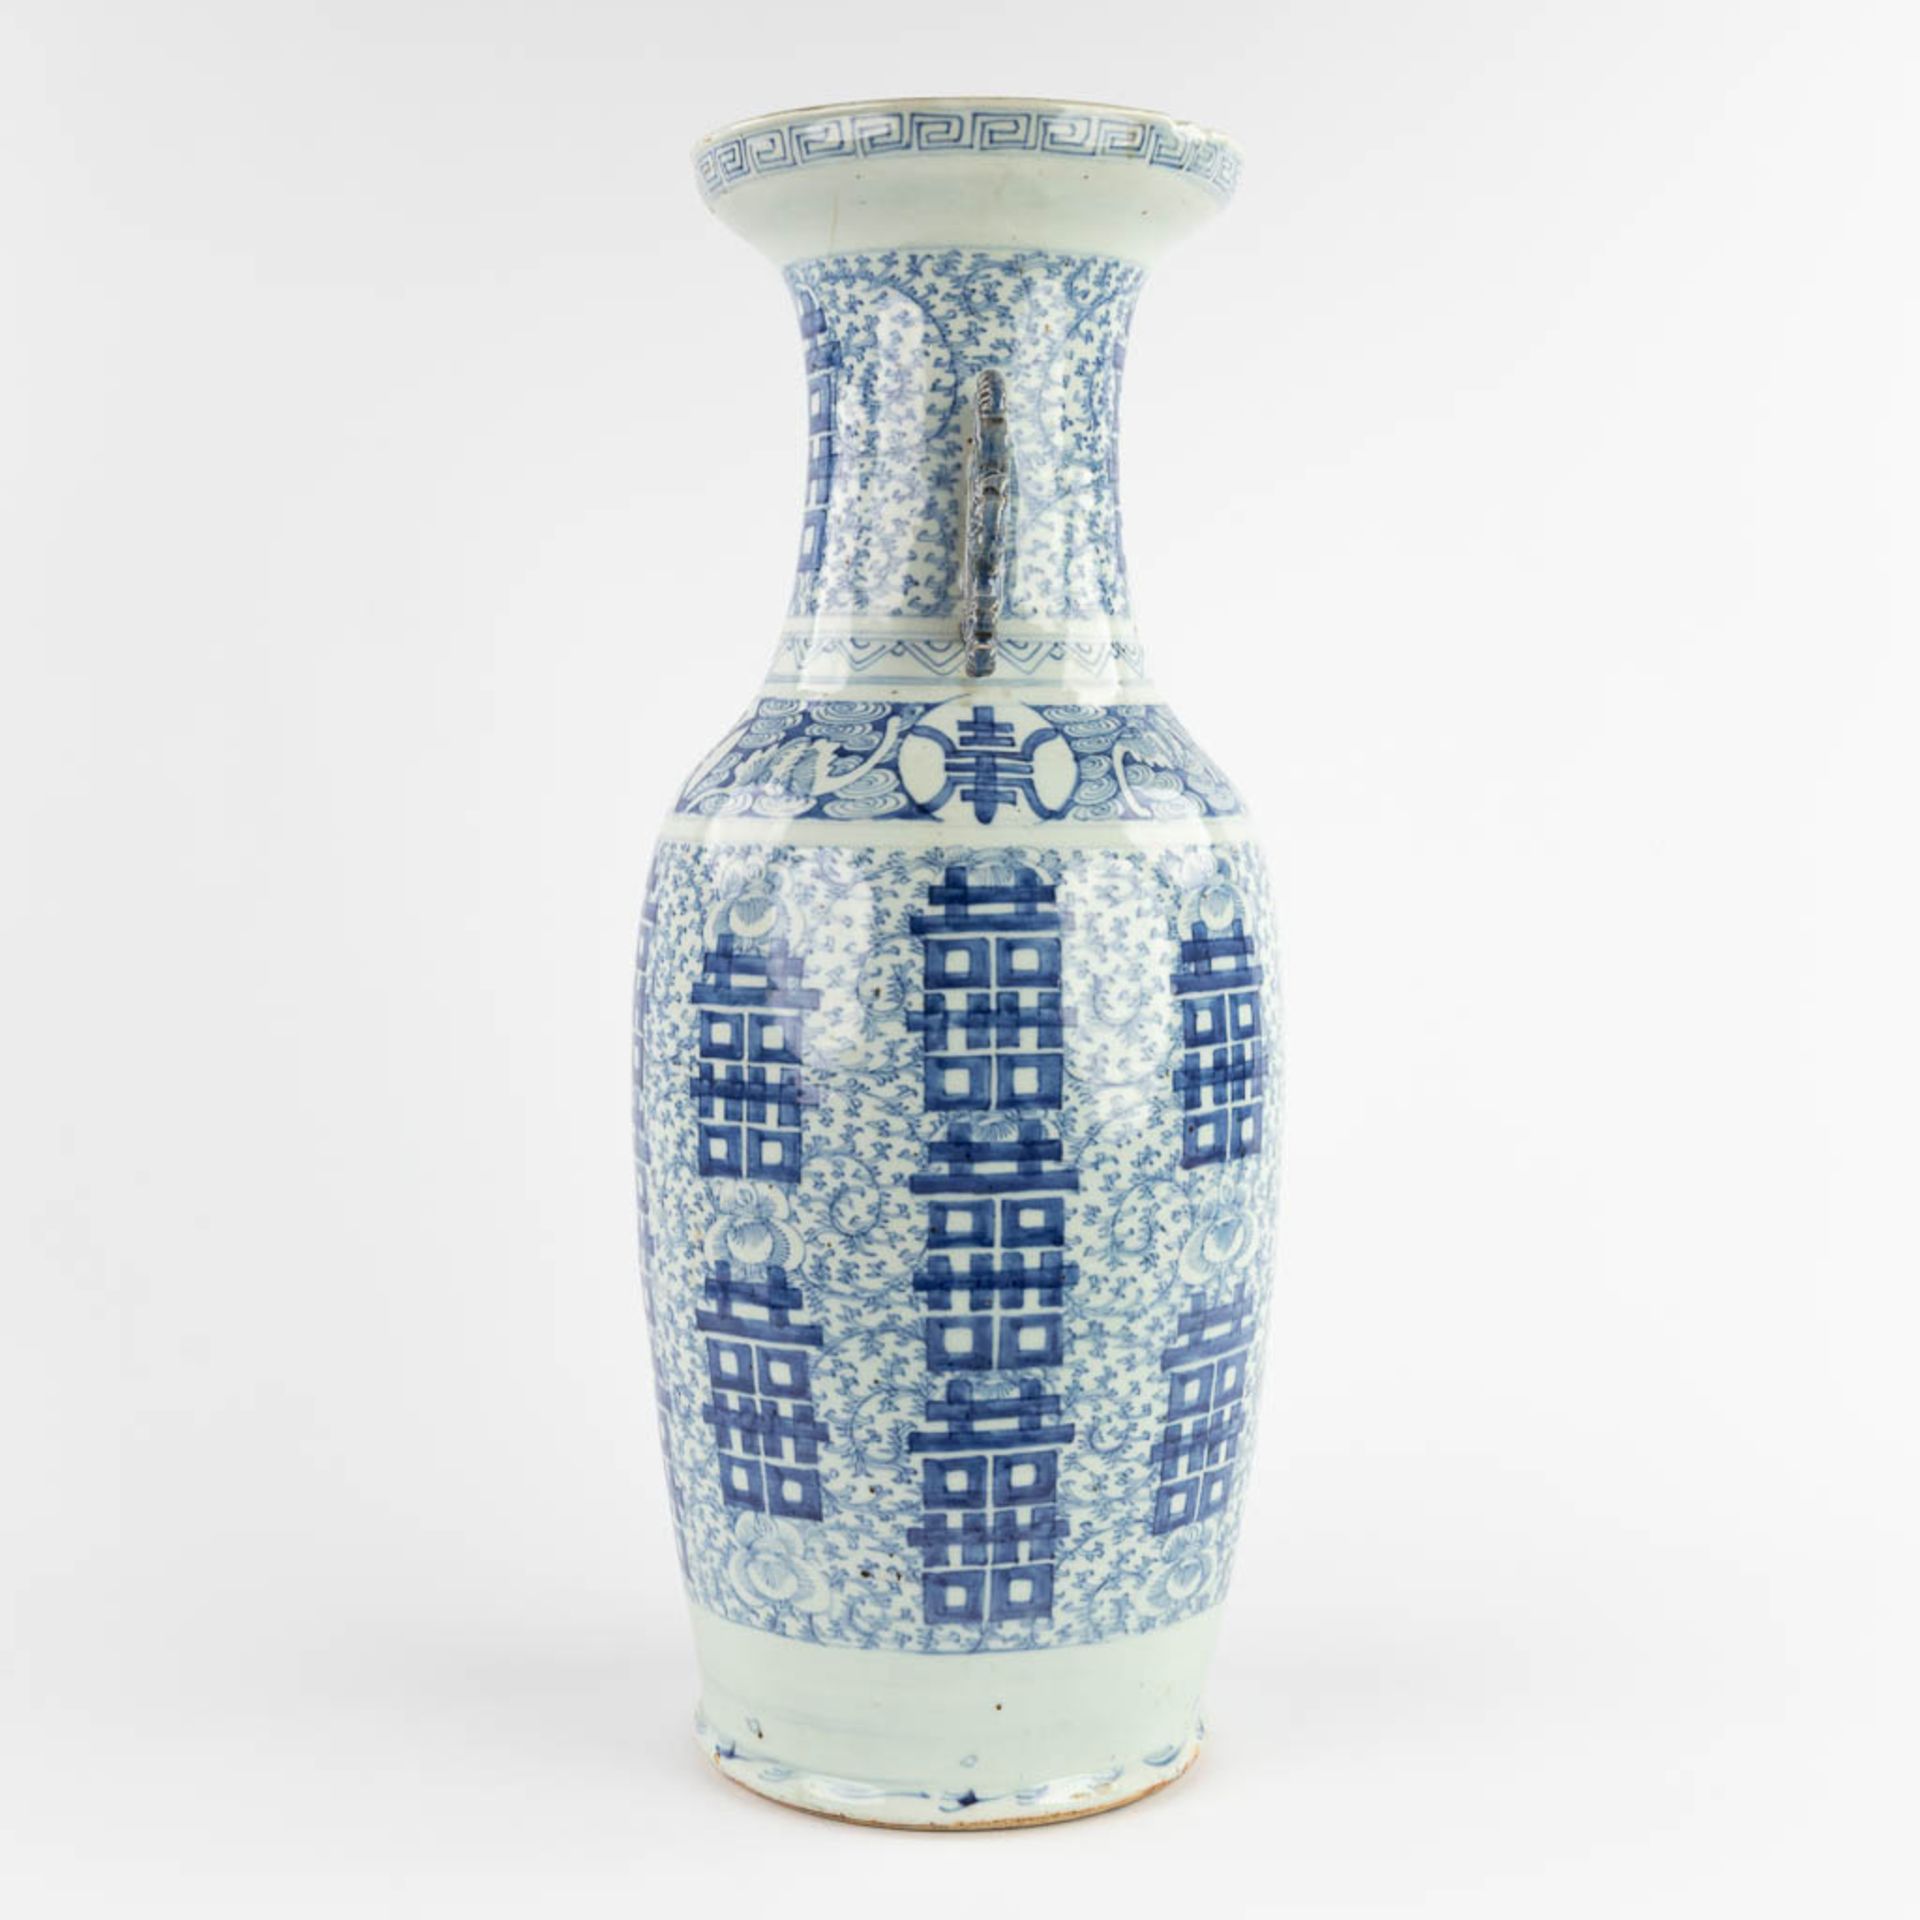 A Chinese vase, blue-white with a Double Xi, sign of happiness. 19th/20th C. (H:62 x D:25 cm) - Bild 4 aus 13